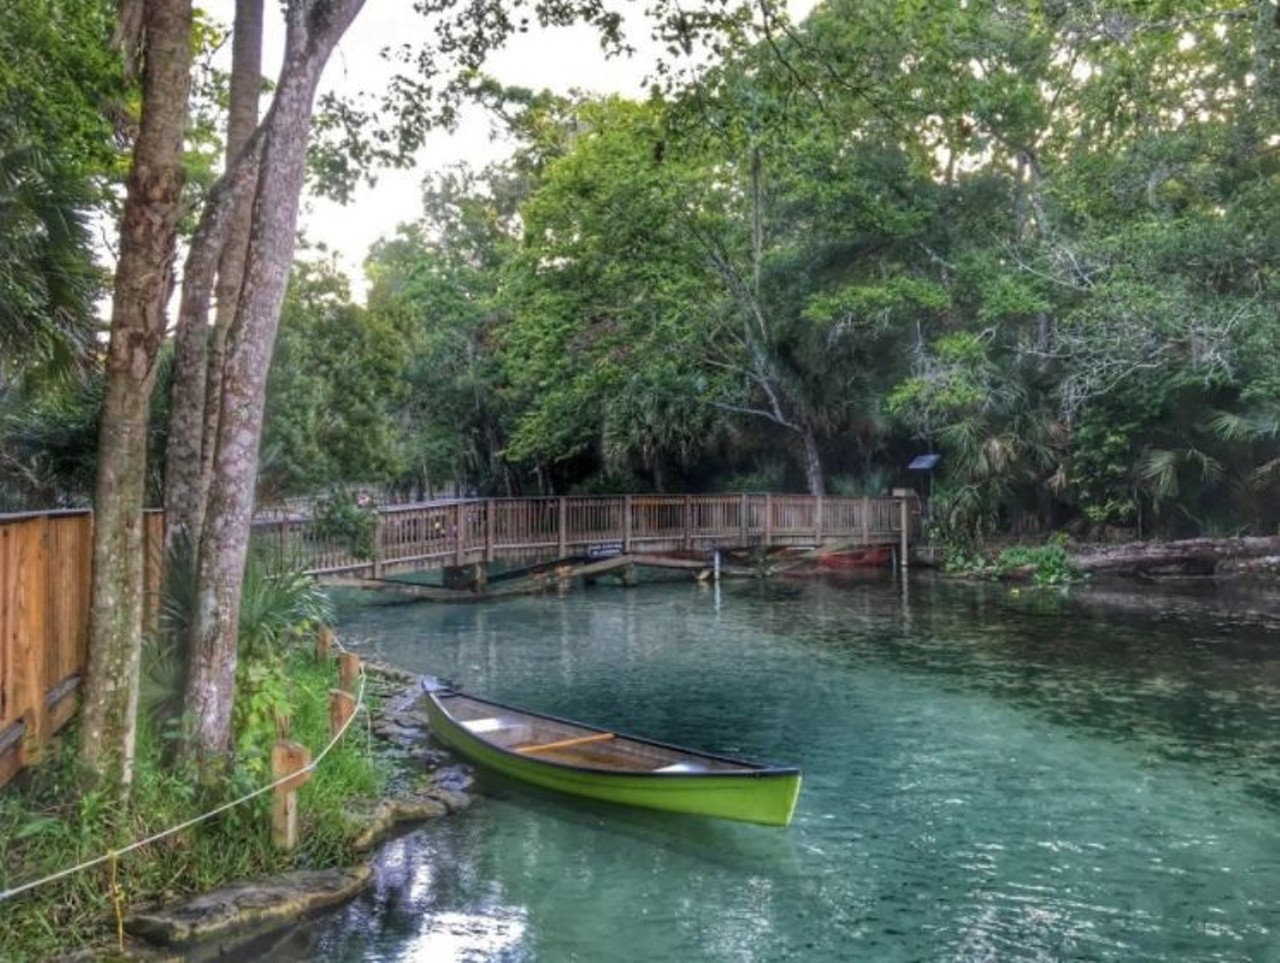 Wekiwa Springs
1800 Wekiwa Cir, Apopka, FL 32712; 30 minutes from Orlando 
One of the more popular springs in the area, it&#146;s recommended that you get there early to be sure you&#146;ll find a parking space. Maybe it&#146;s due to the Wekiwa River being only one of two National Wild & Scenic Rivers recognized in the state or the many ways you can travel down the stream of water (canoe, kayak or paddle board), but the fact remains that this is a must for any Orlandoan.  
Photo viacozzy_zy/Instagram